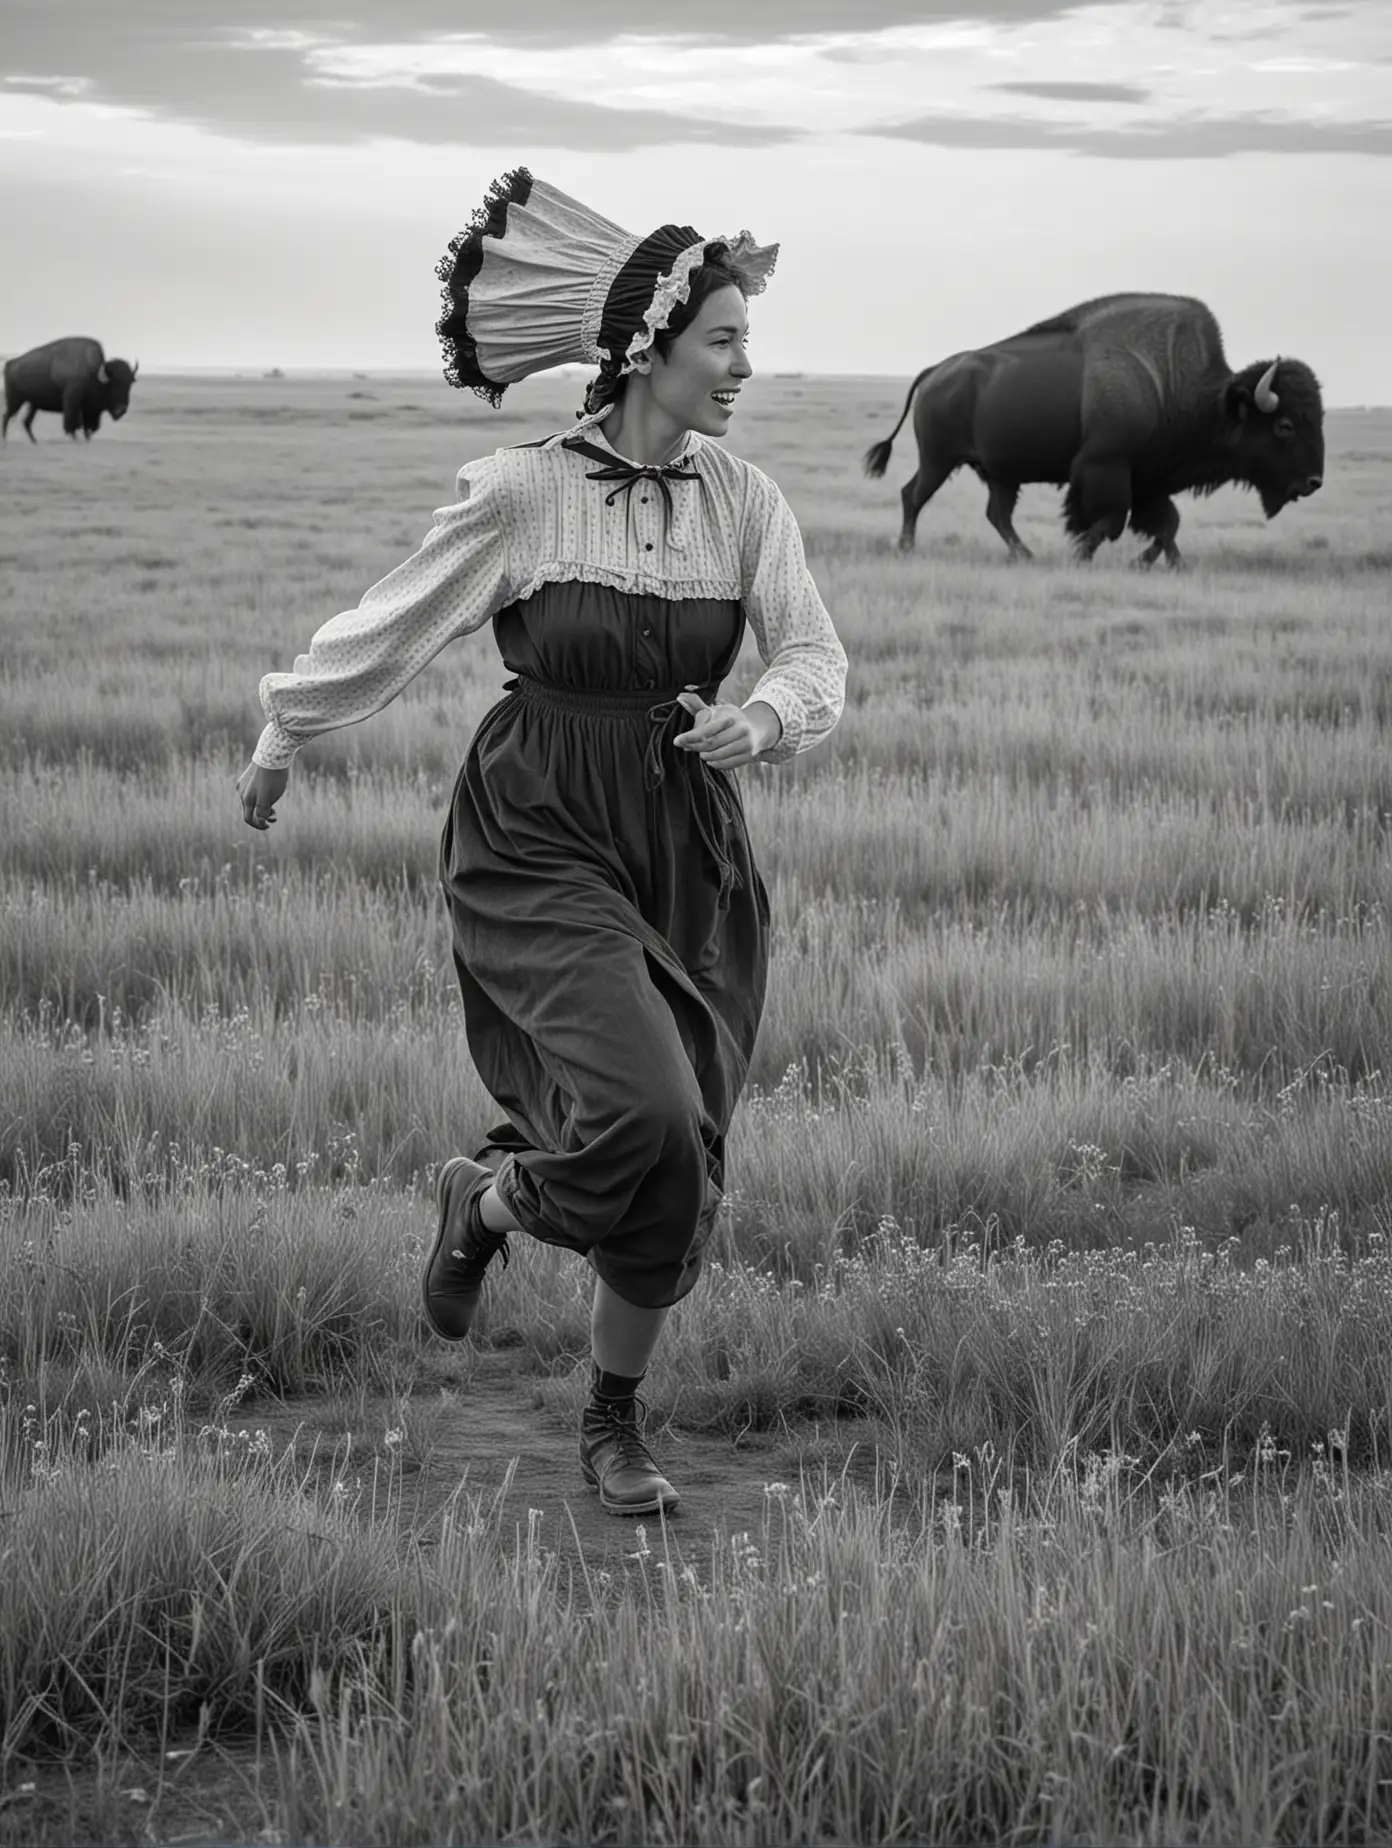 Pioneer Woman Running Across the Prairie with Buffalo in the Background